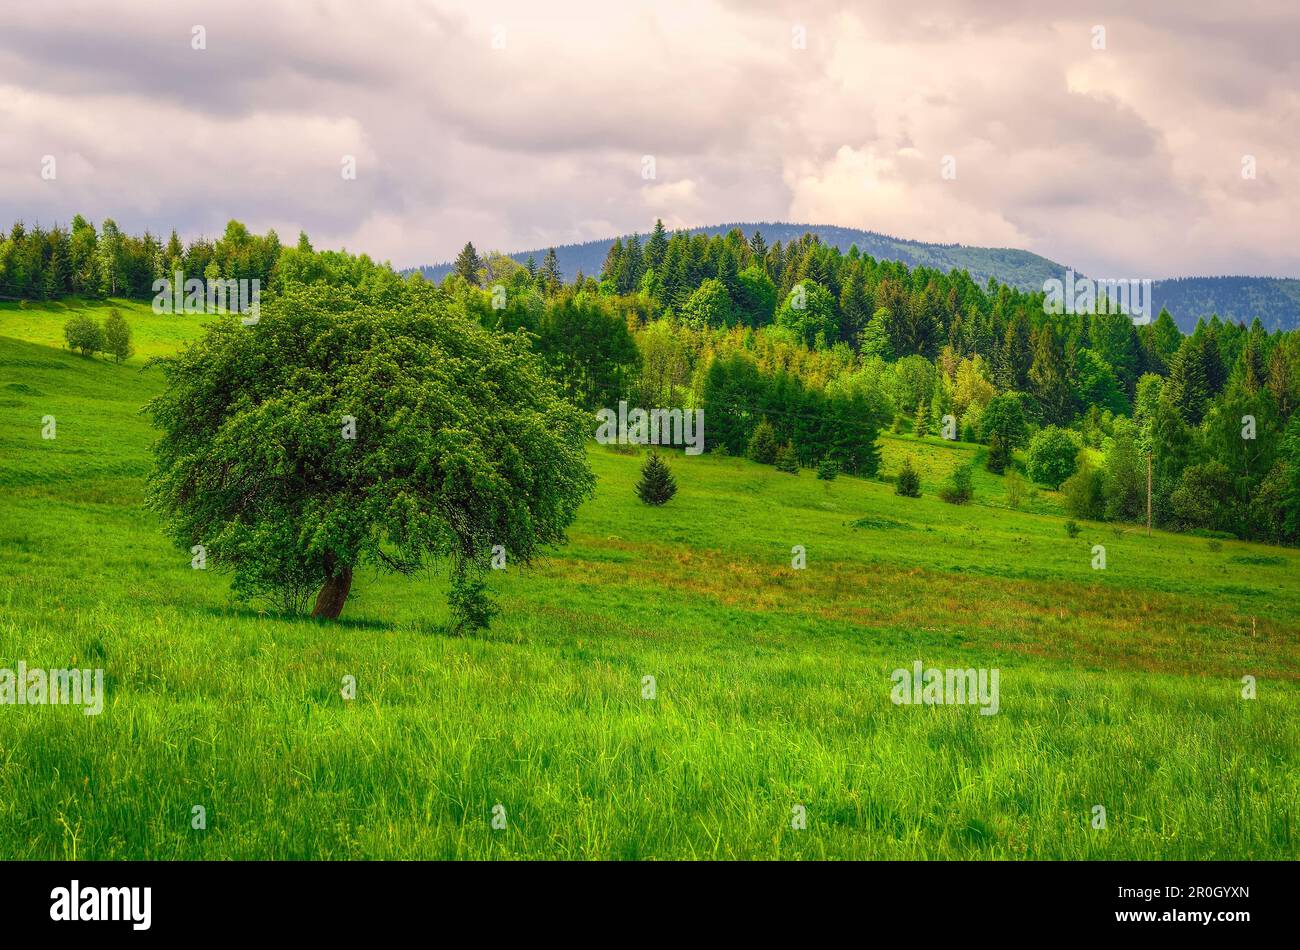 Mountain landscape in spring season. Picturesque view stretches over single tree on the grassland and green hills, Beskidy mountains, Poland. Stock Photo